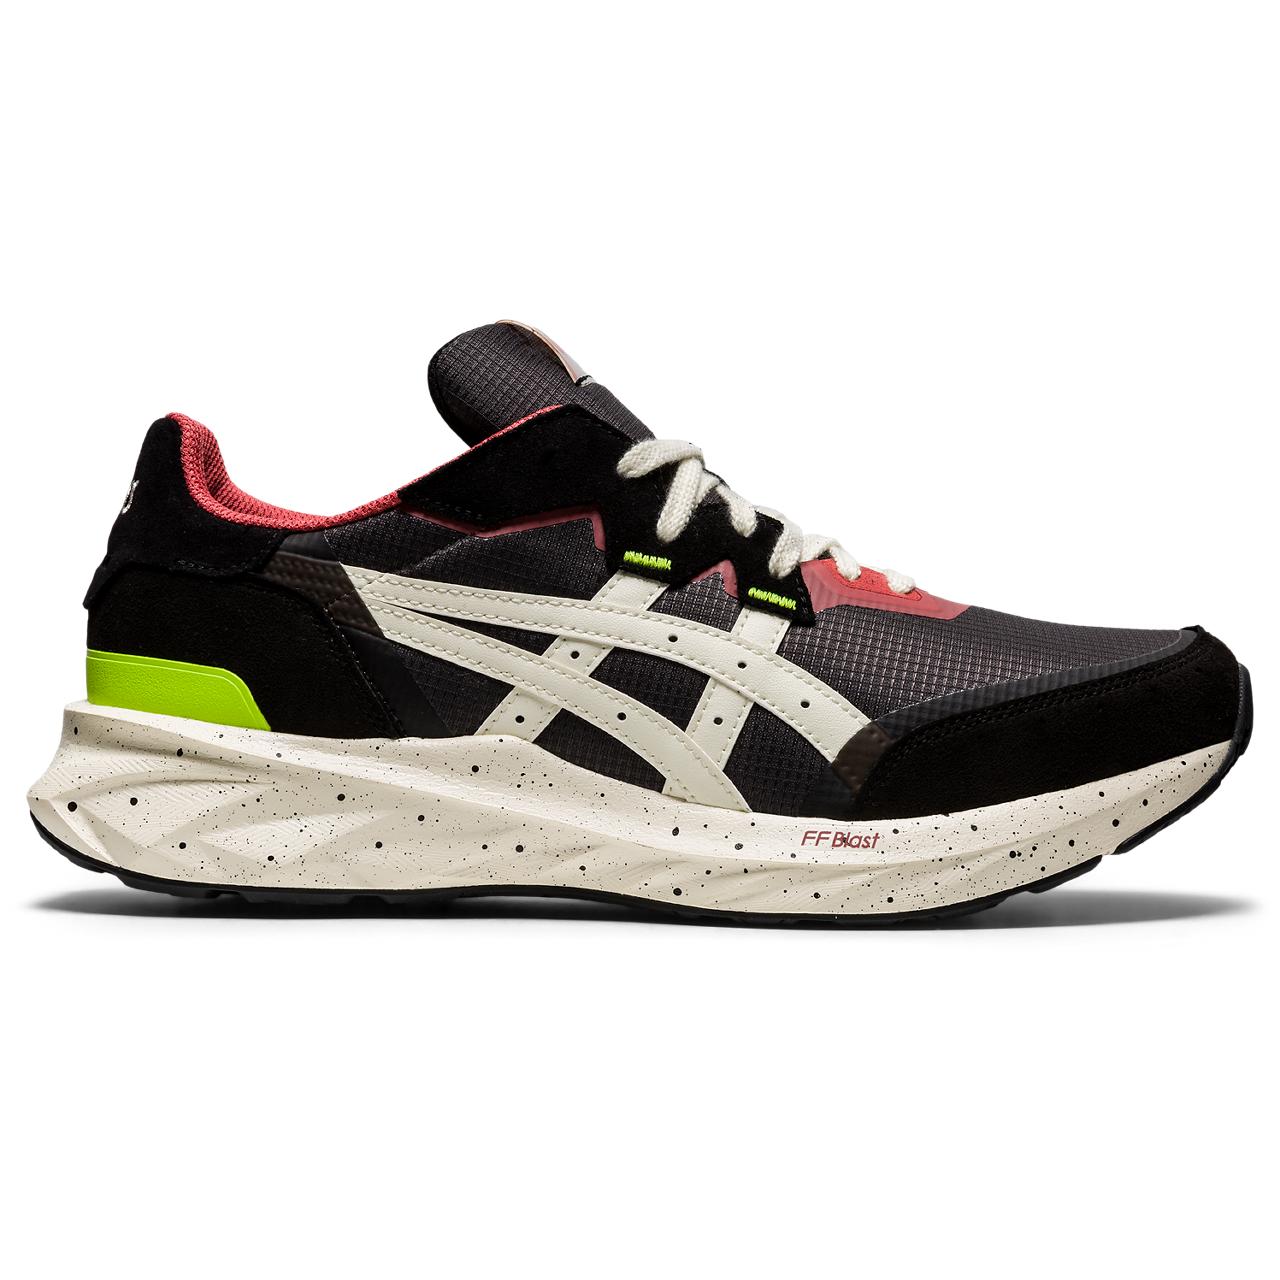 buy asics shoes online south africa